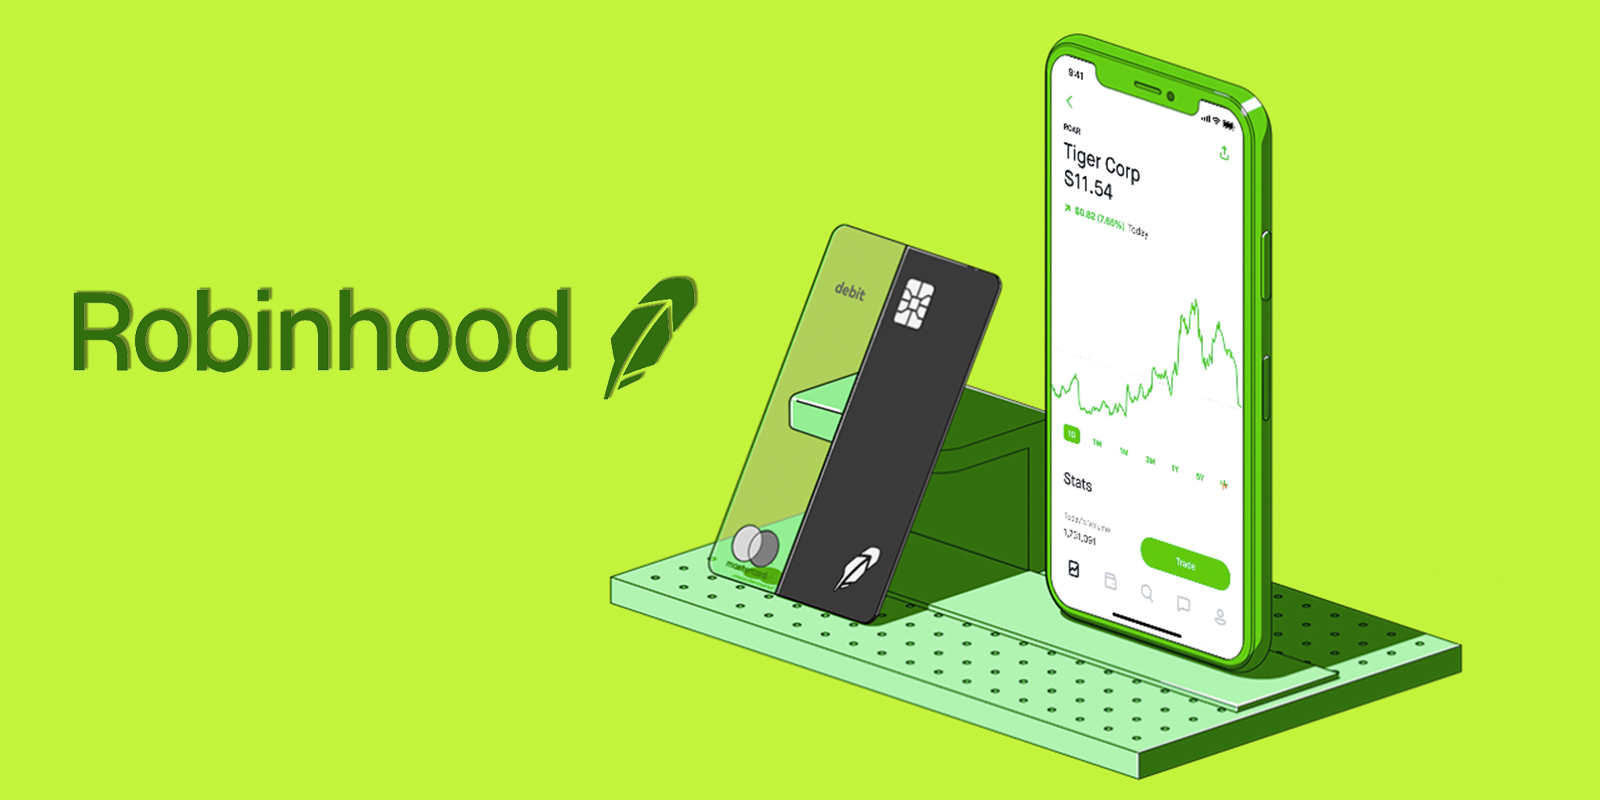 New Robinhood Feature Allows Users To Gift Crypto To Family And Friends